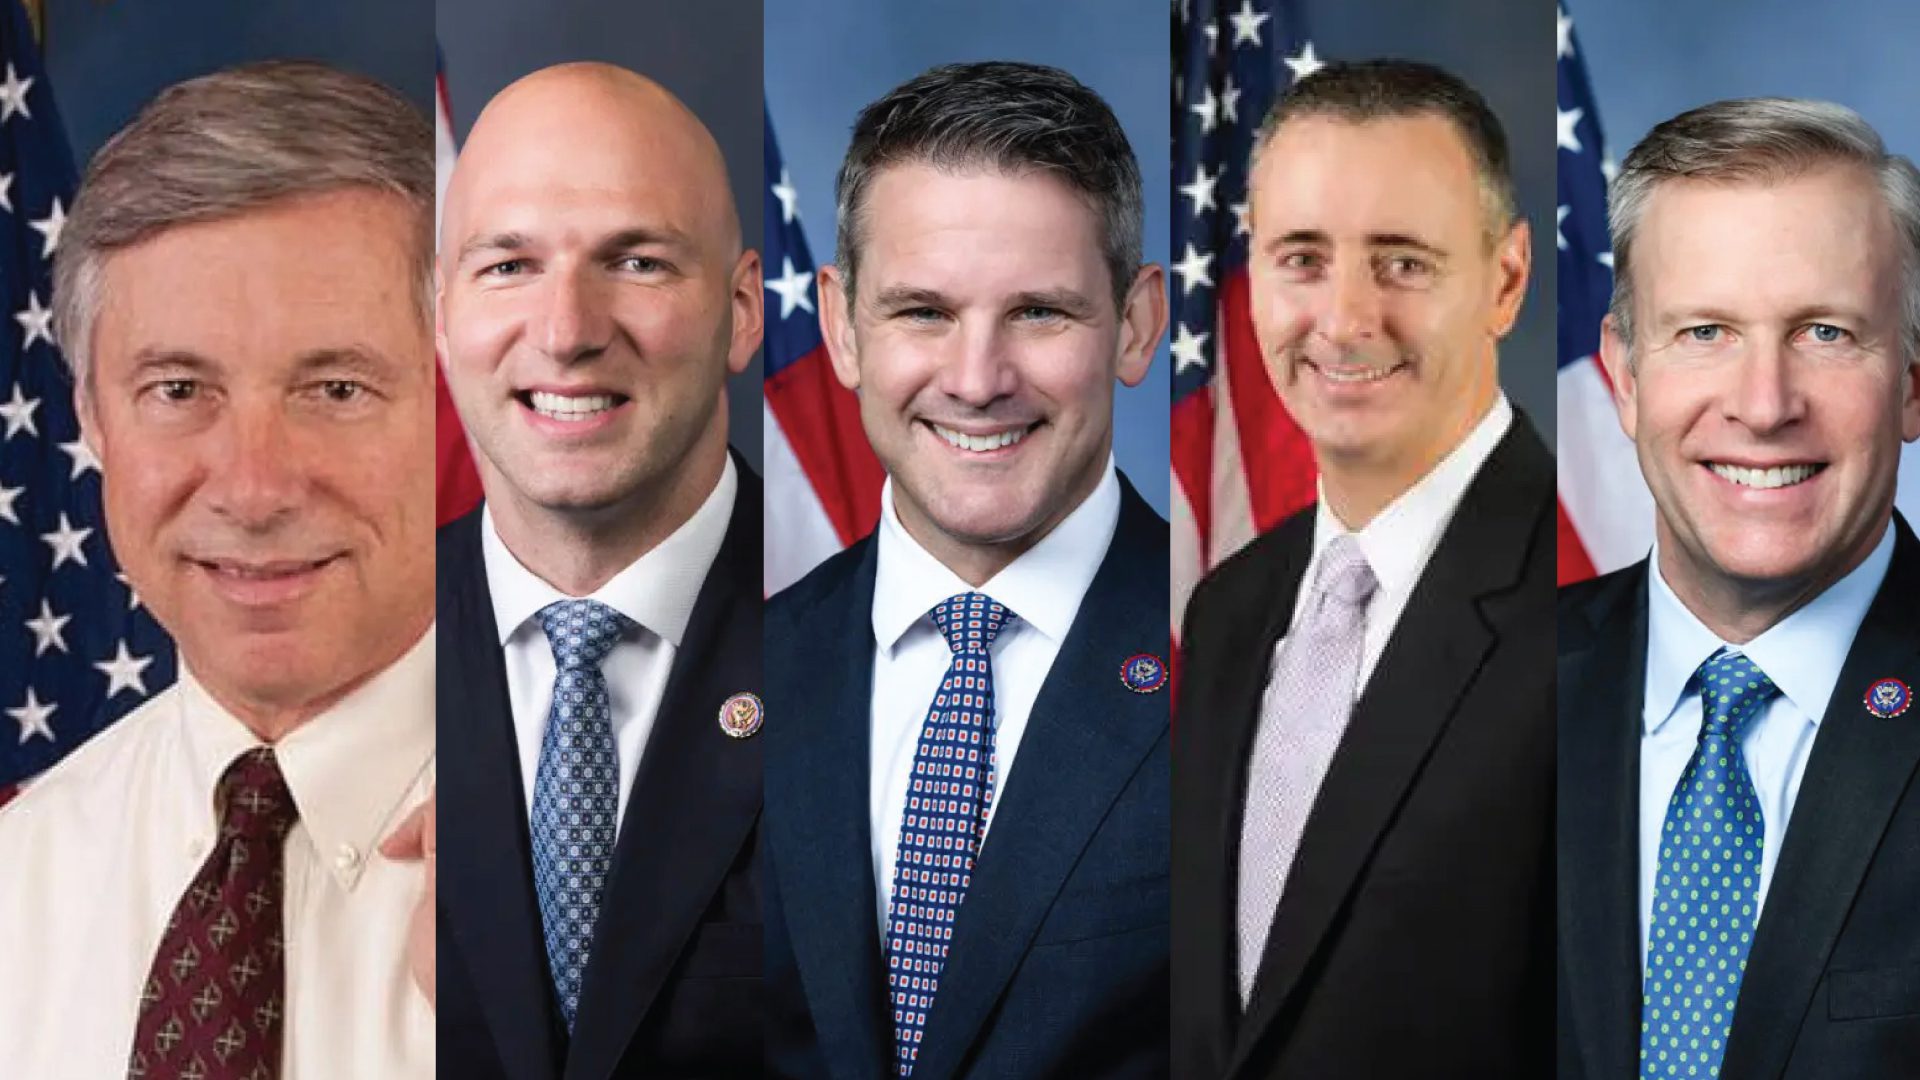 The 5 Republicans who voted for Pelosi's gun control package.